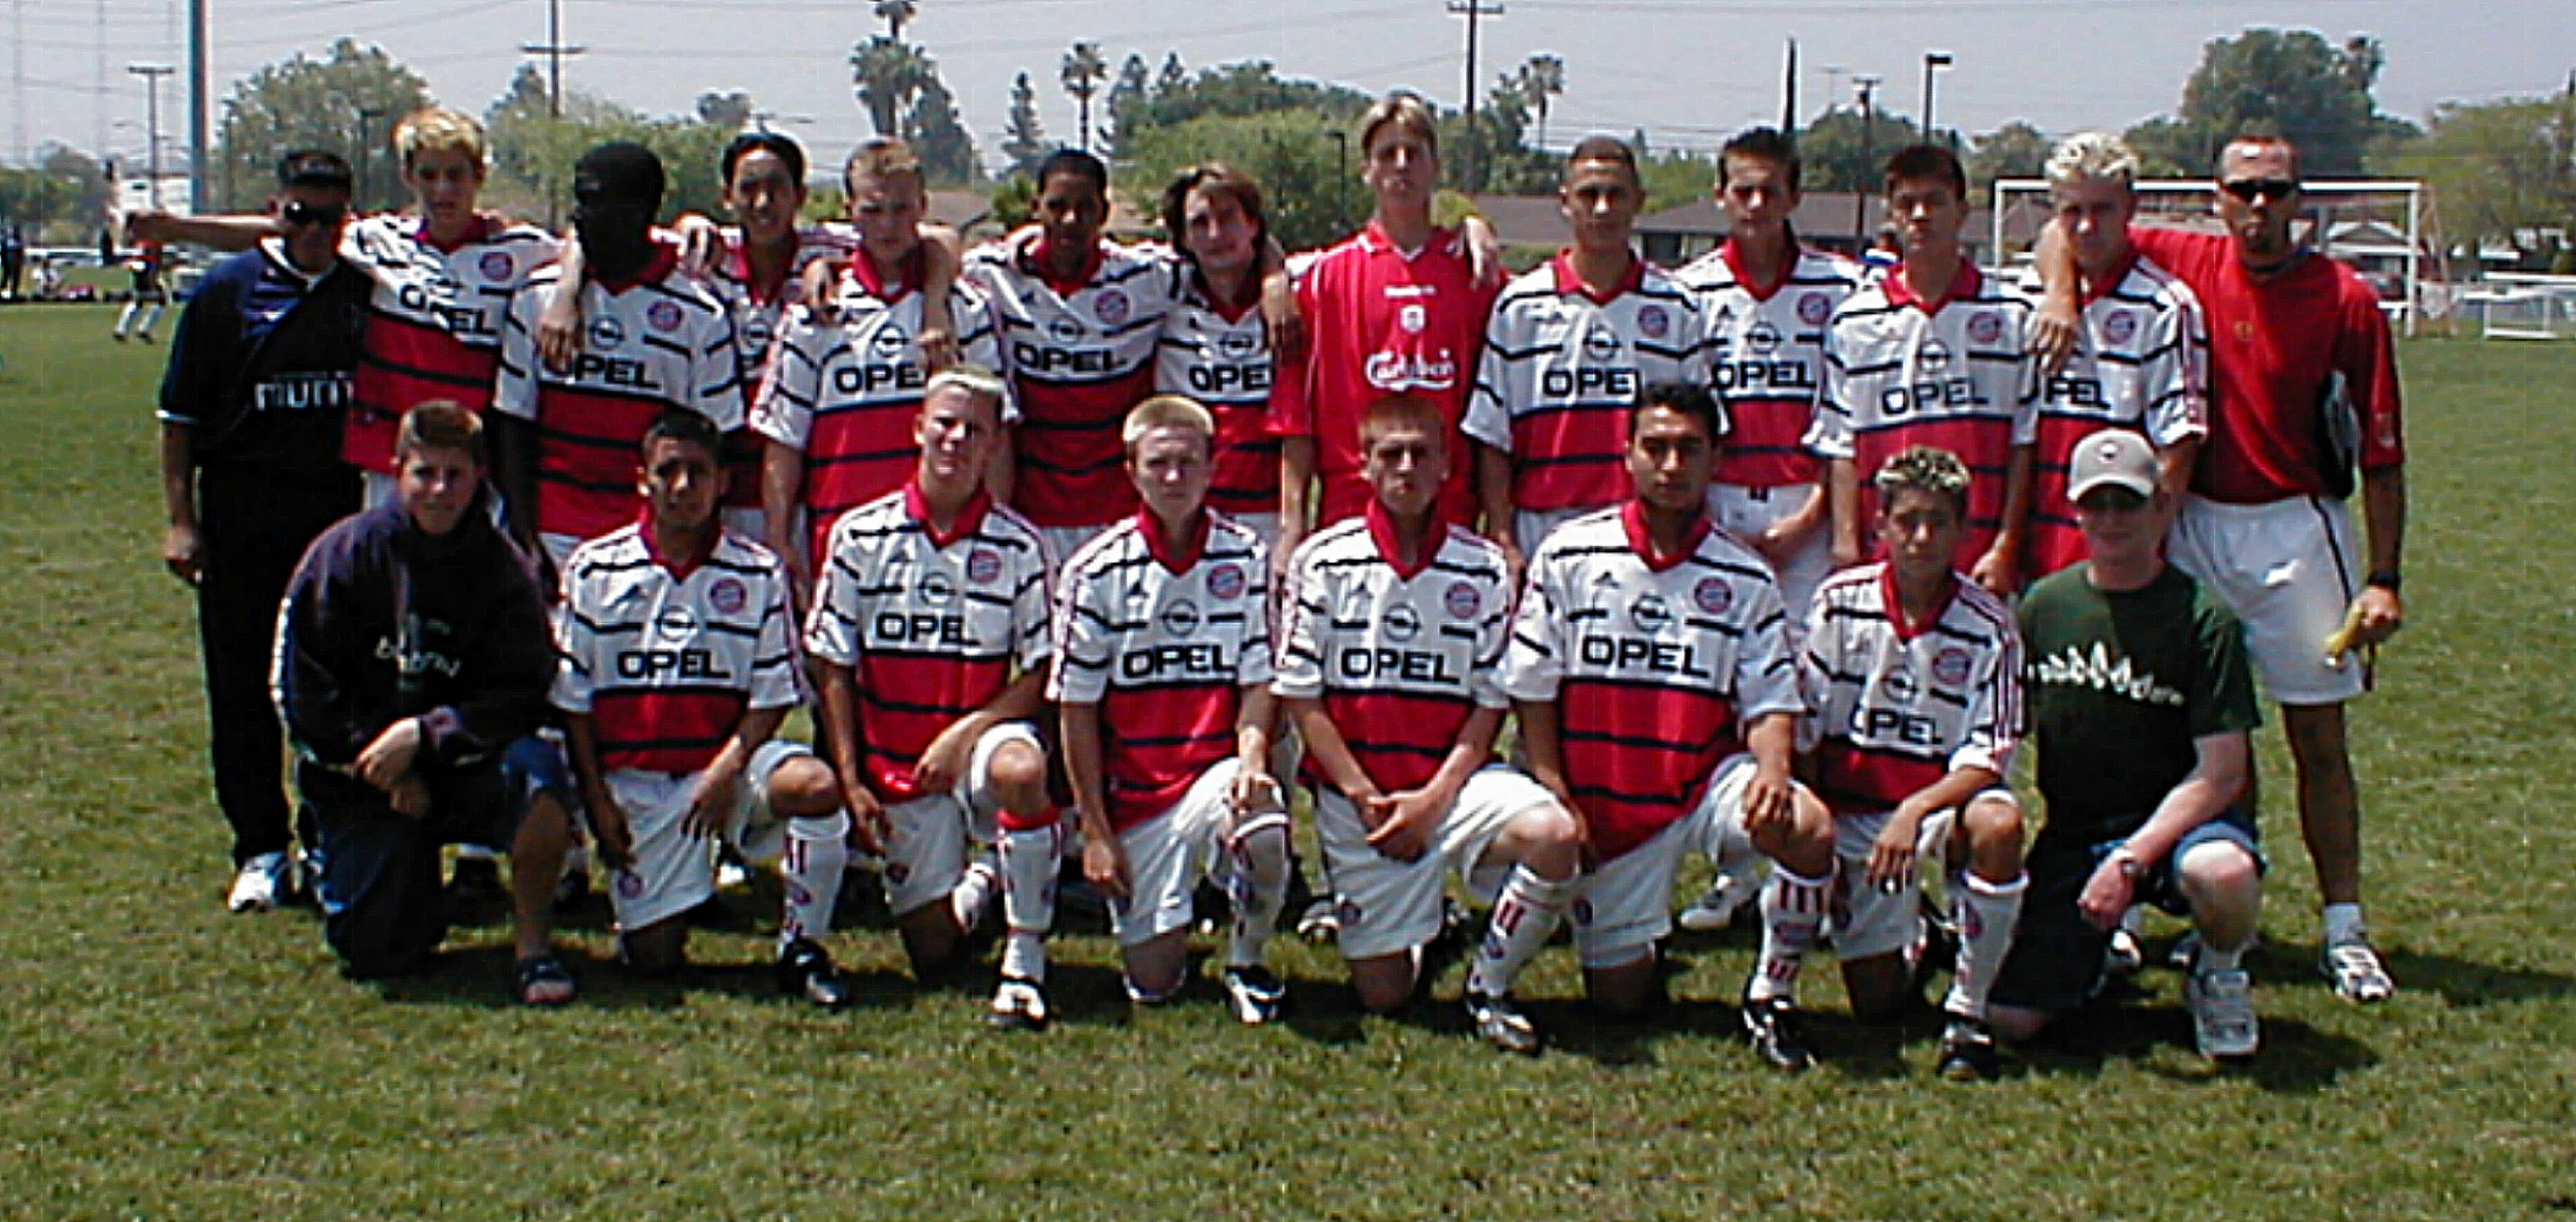 Soccer players; Actual size=240 pixels wide